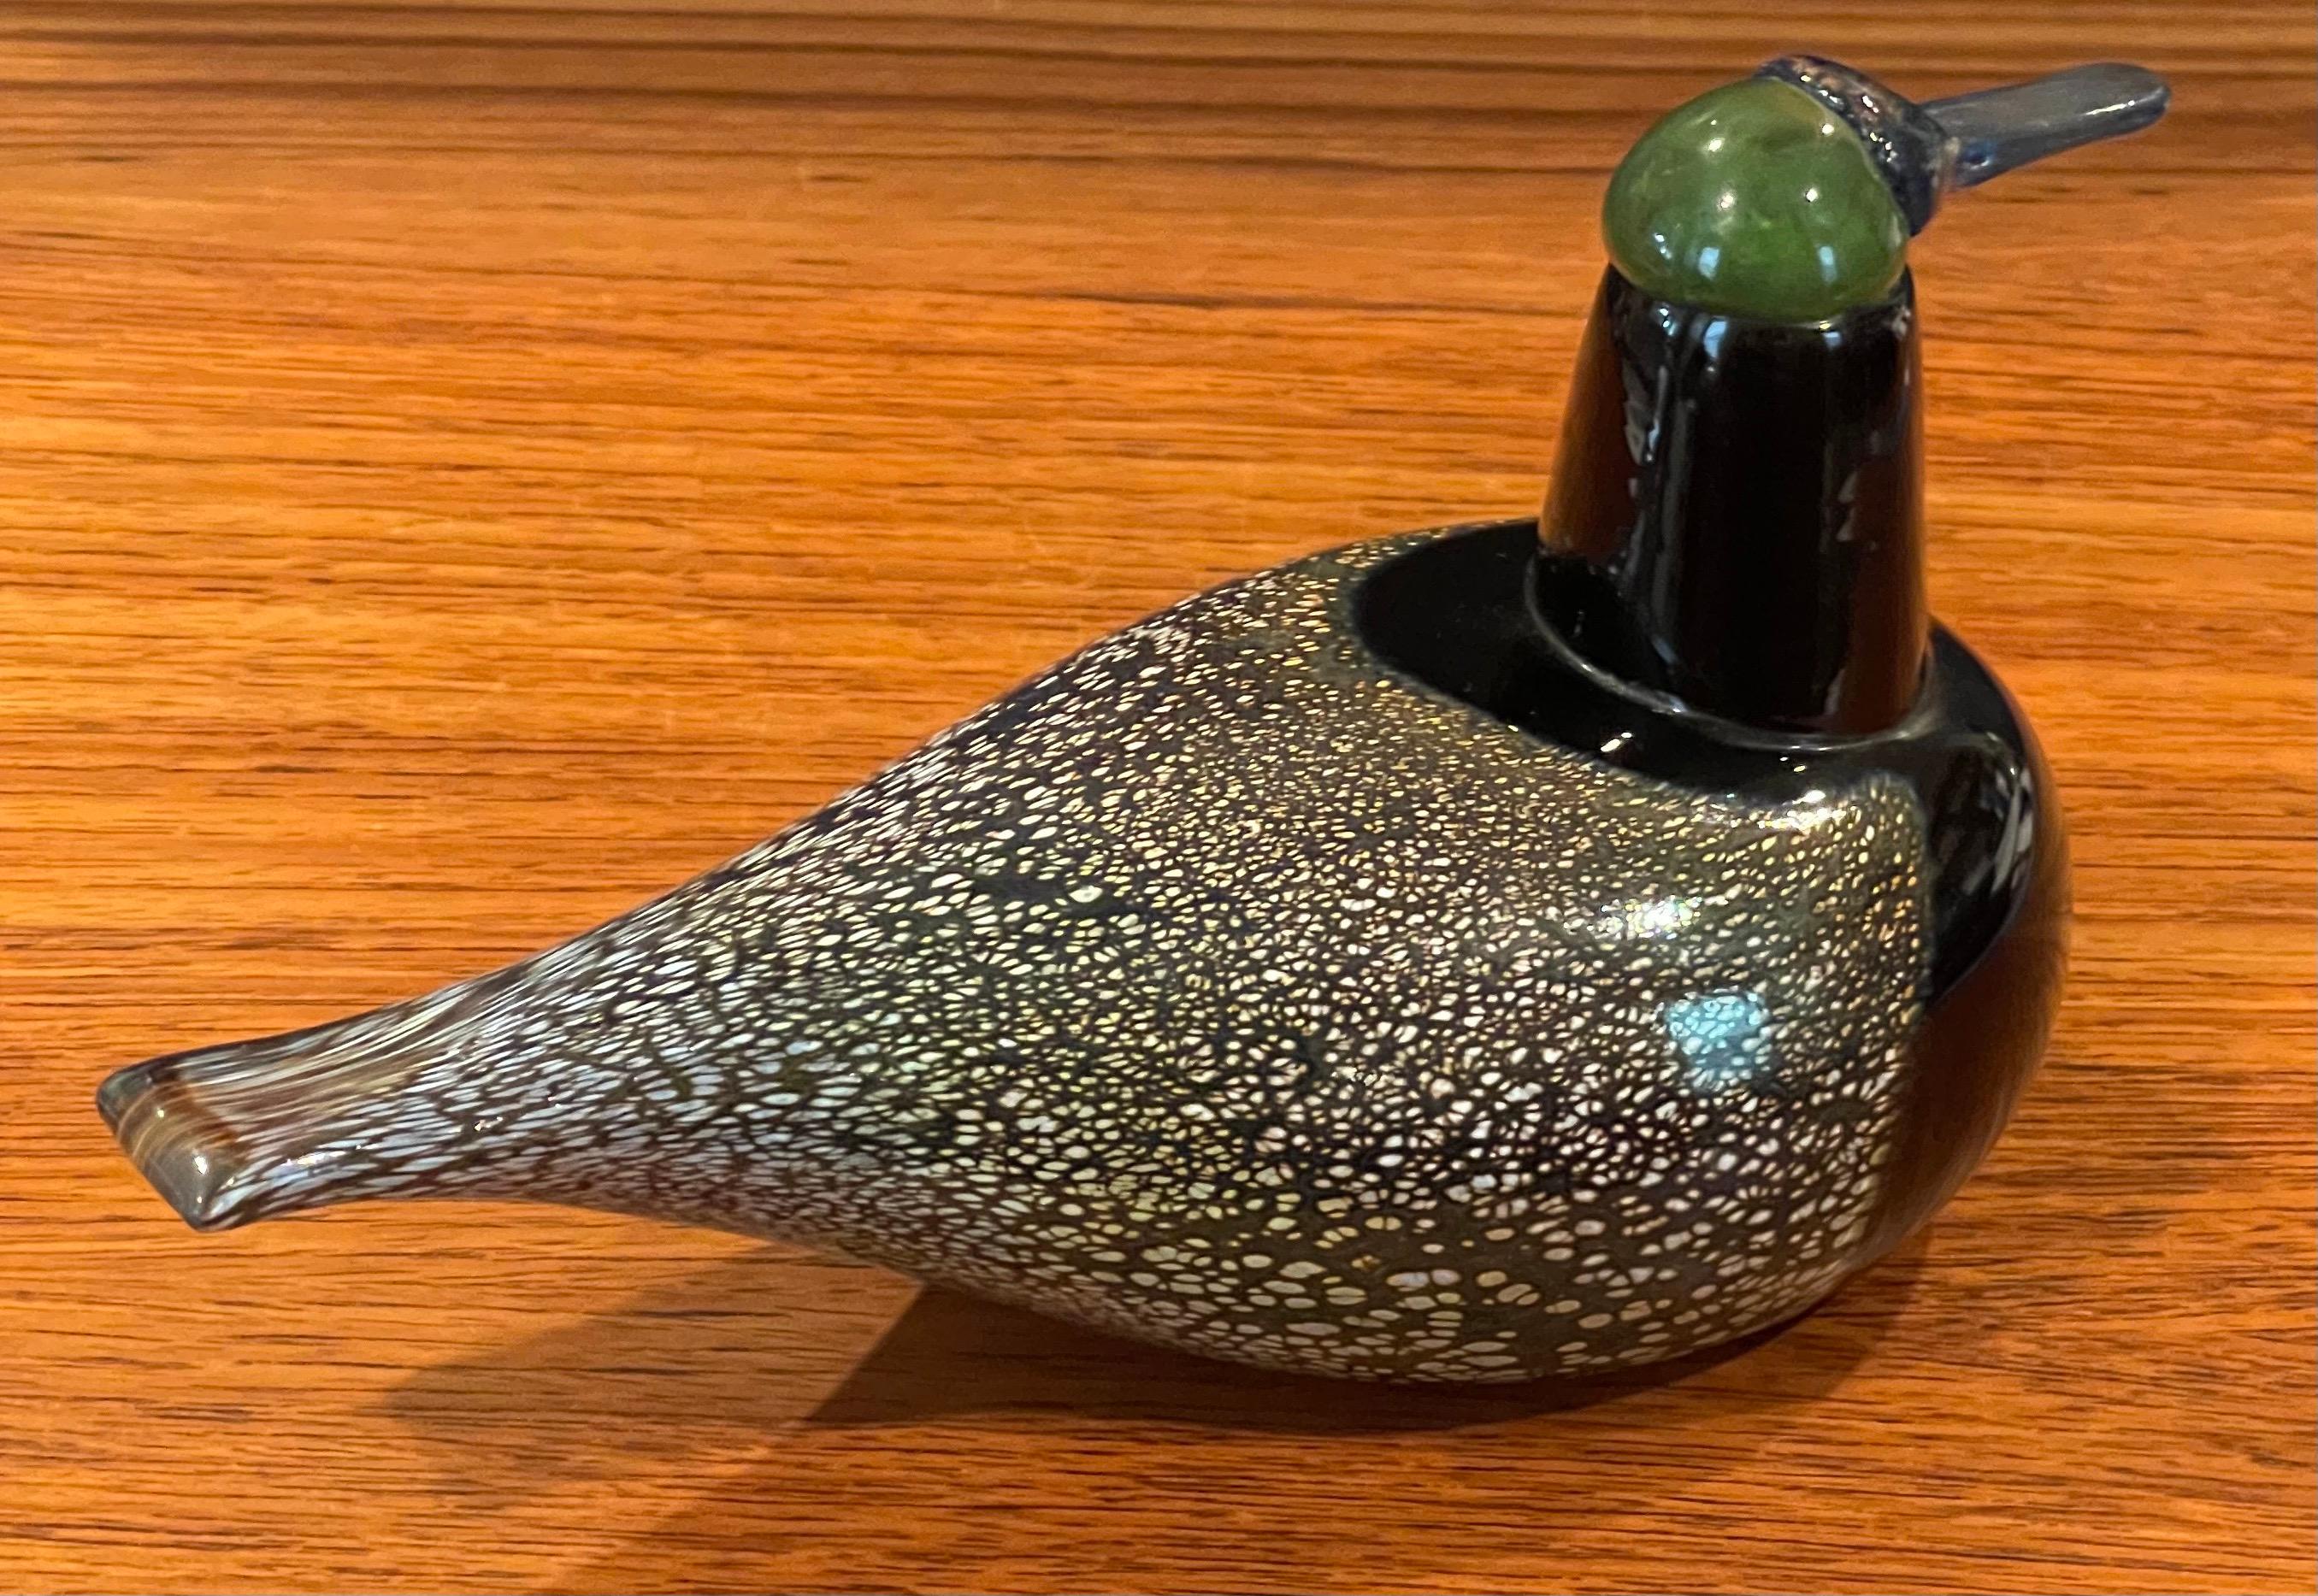 Art Glass Bird Sculpture by Oiva Toikka for Iittala of Finland In Good Condition For Sale In San Diego, CA